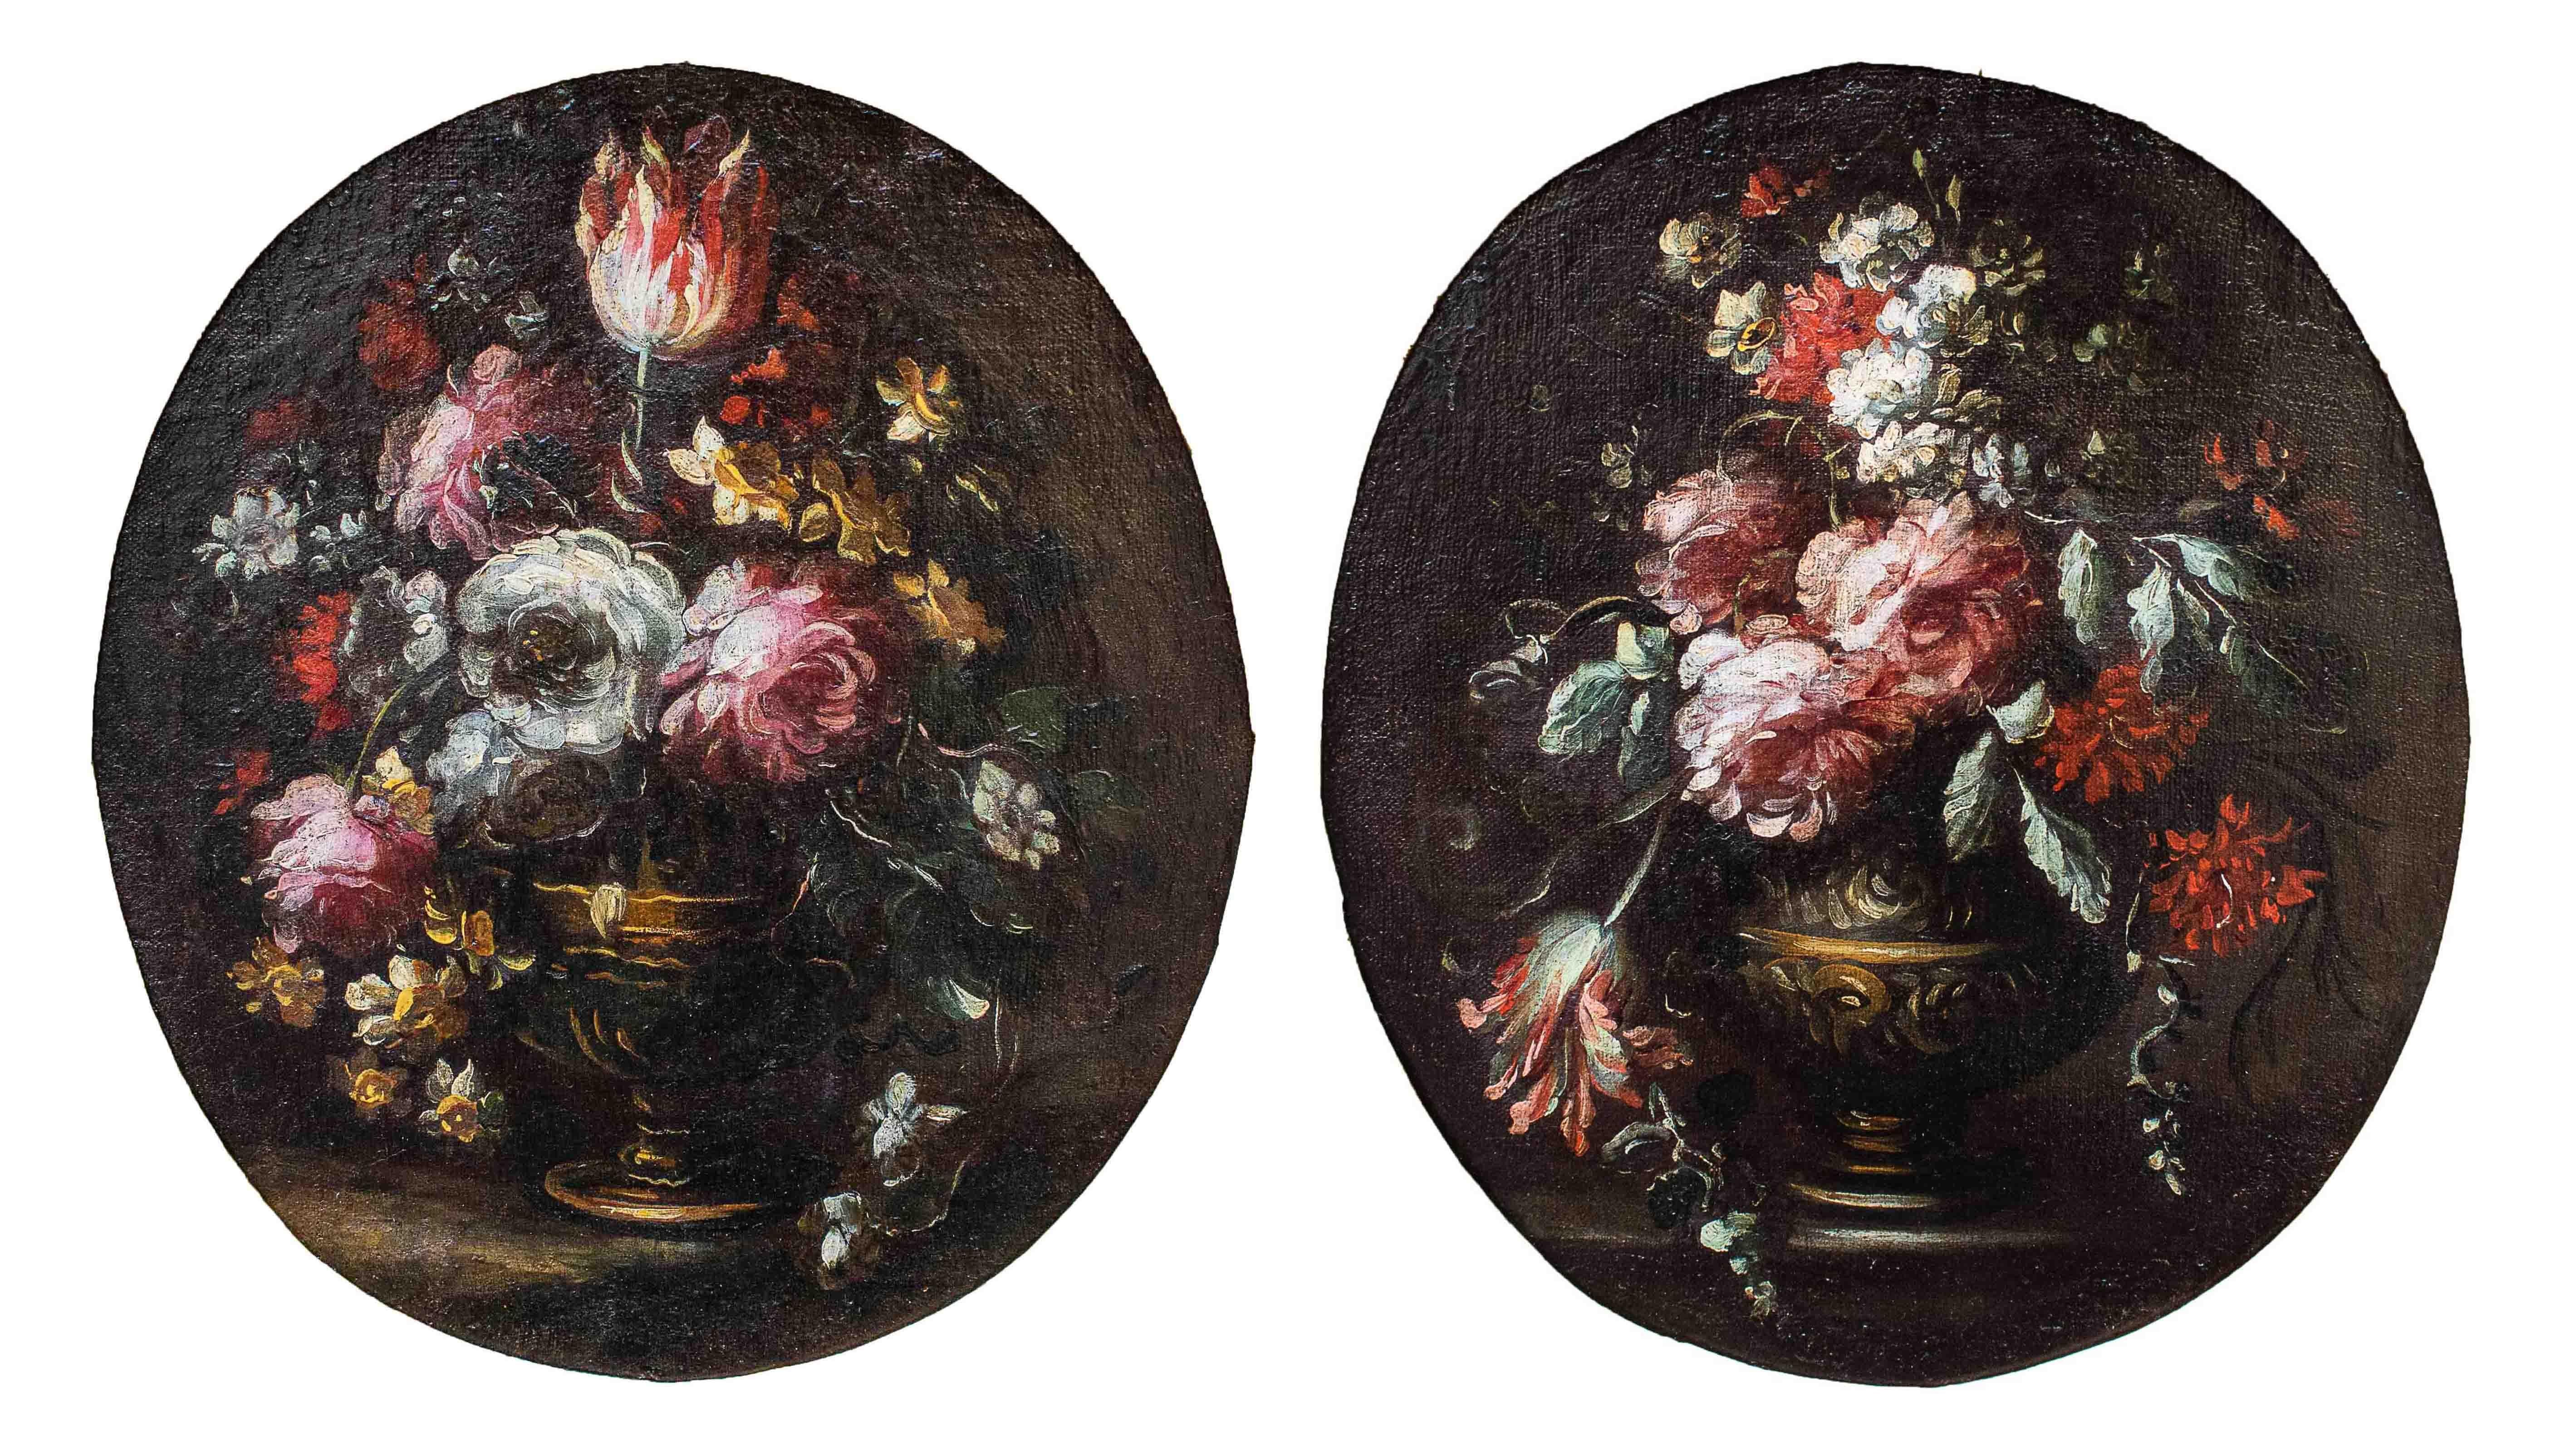 Margherita Caffi (1647 - 1710), attributed
Still lifes with flowers
(2) Oil on canvas, 47 x 39 cm - with frame, 57 x 49 cm

Given the stylistic and formal comparisons, the pair of paintings representing two still lifes with flowers can be